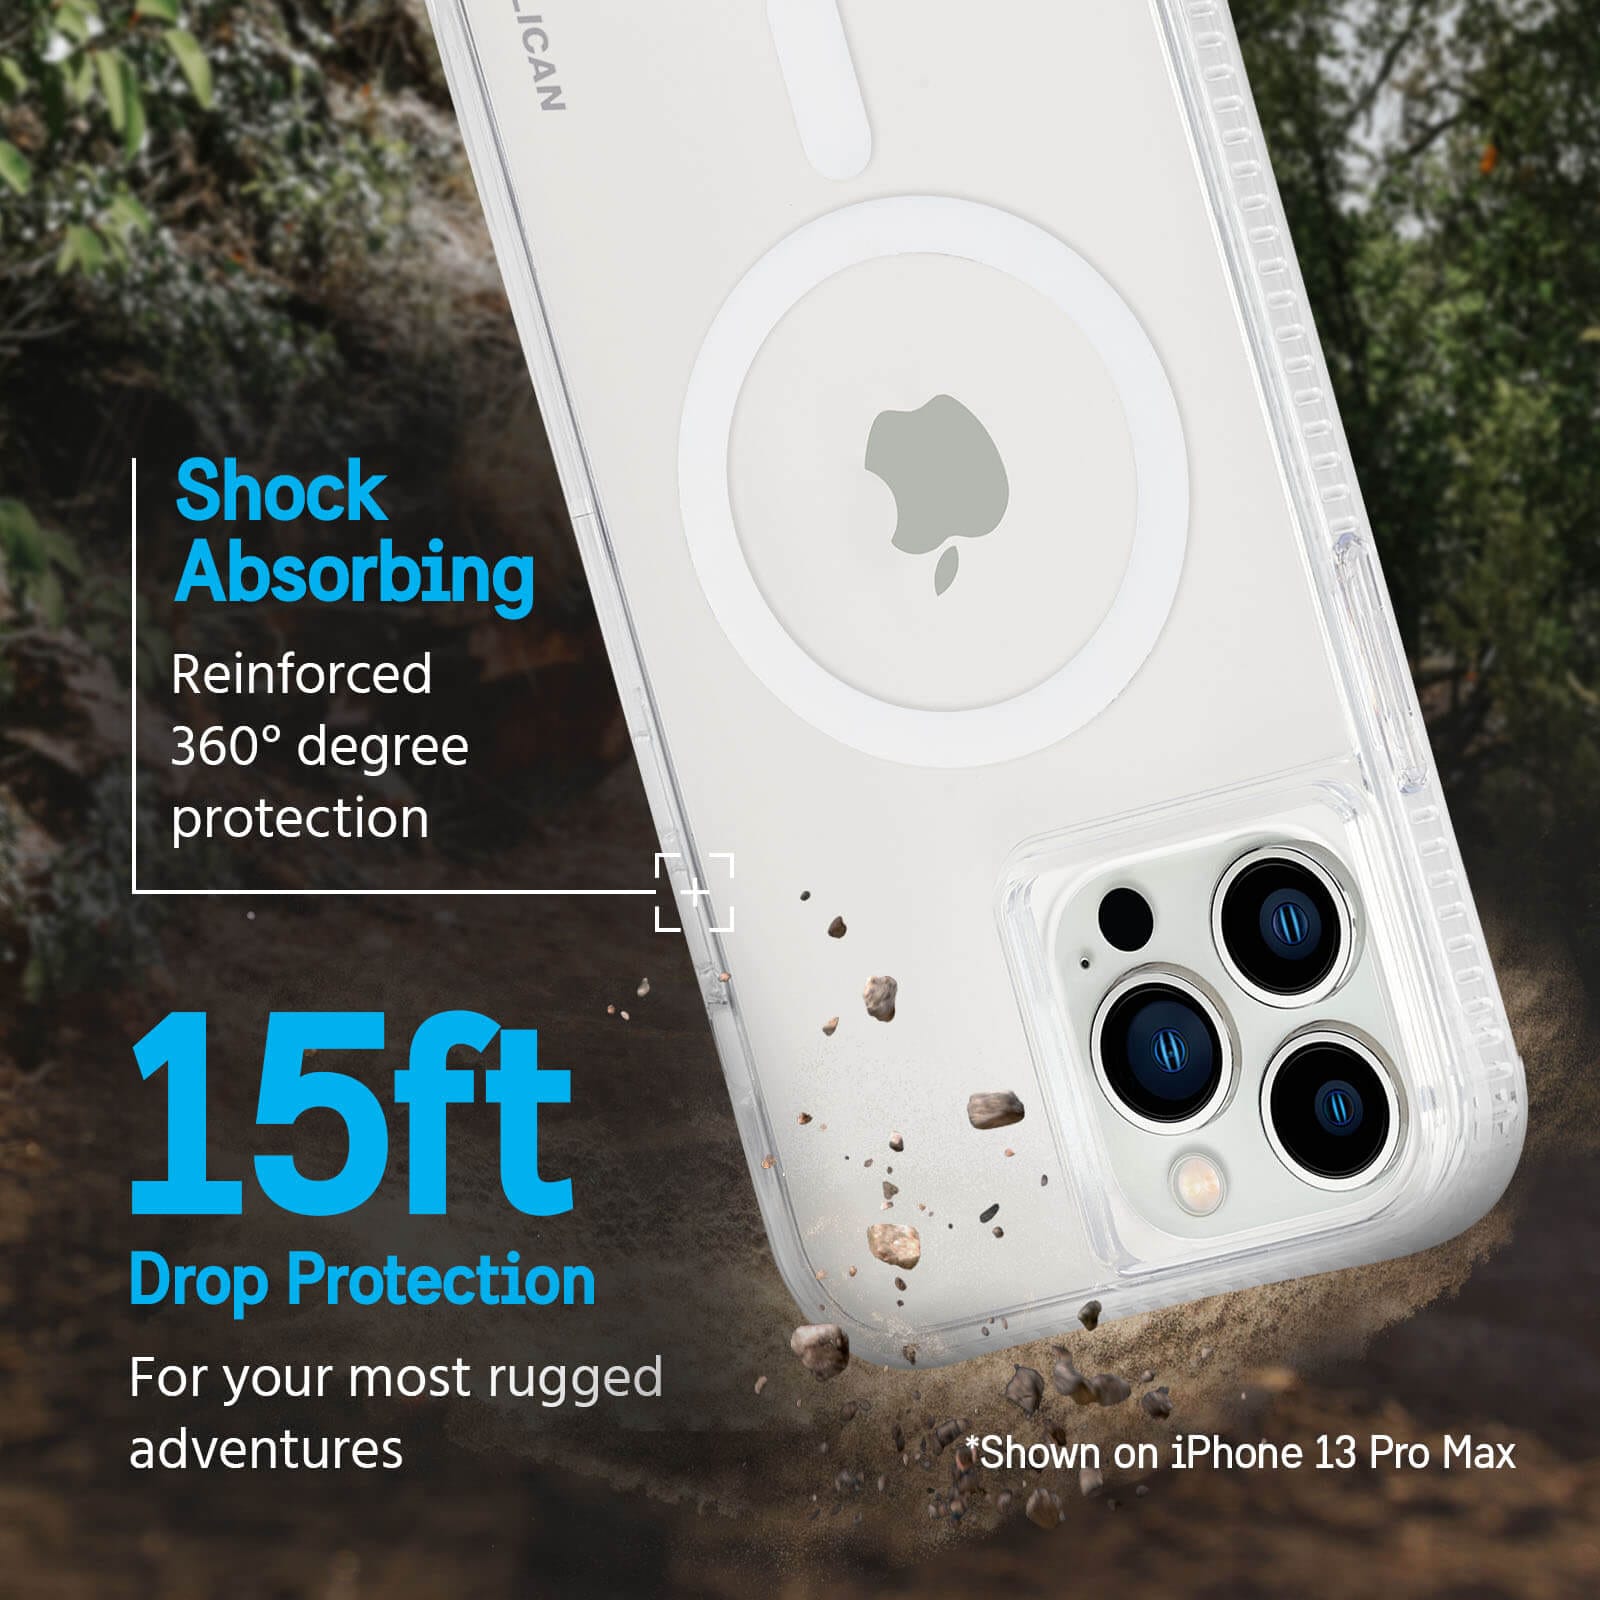 Shock absorbing reinforced 360 degree protection. 15ft drop protection for your most rugged adventures. *Shown on iPhone 13 Pro Max. color::Clear